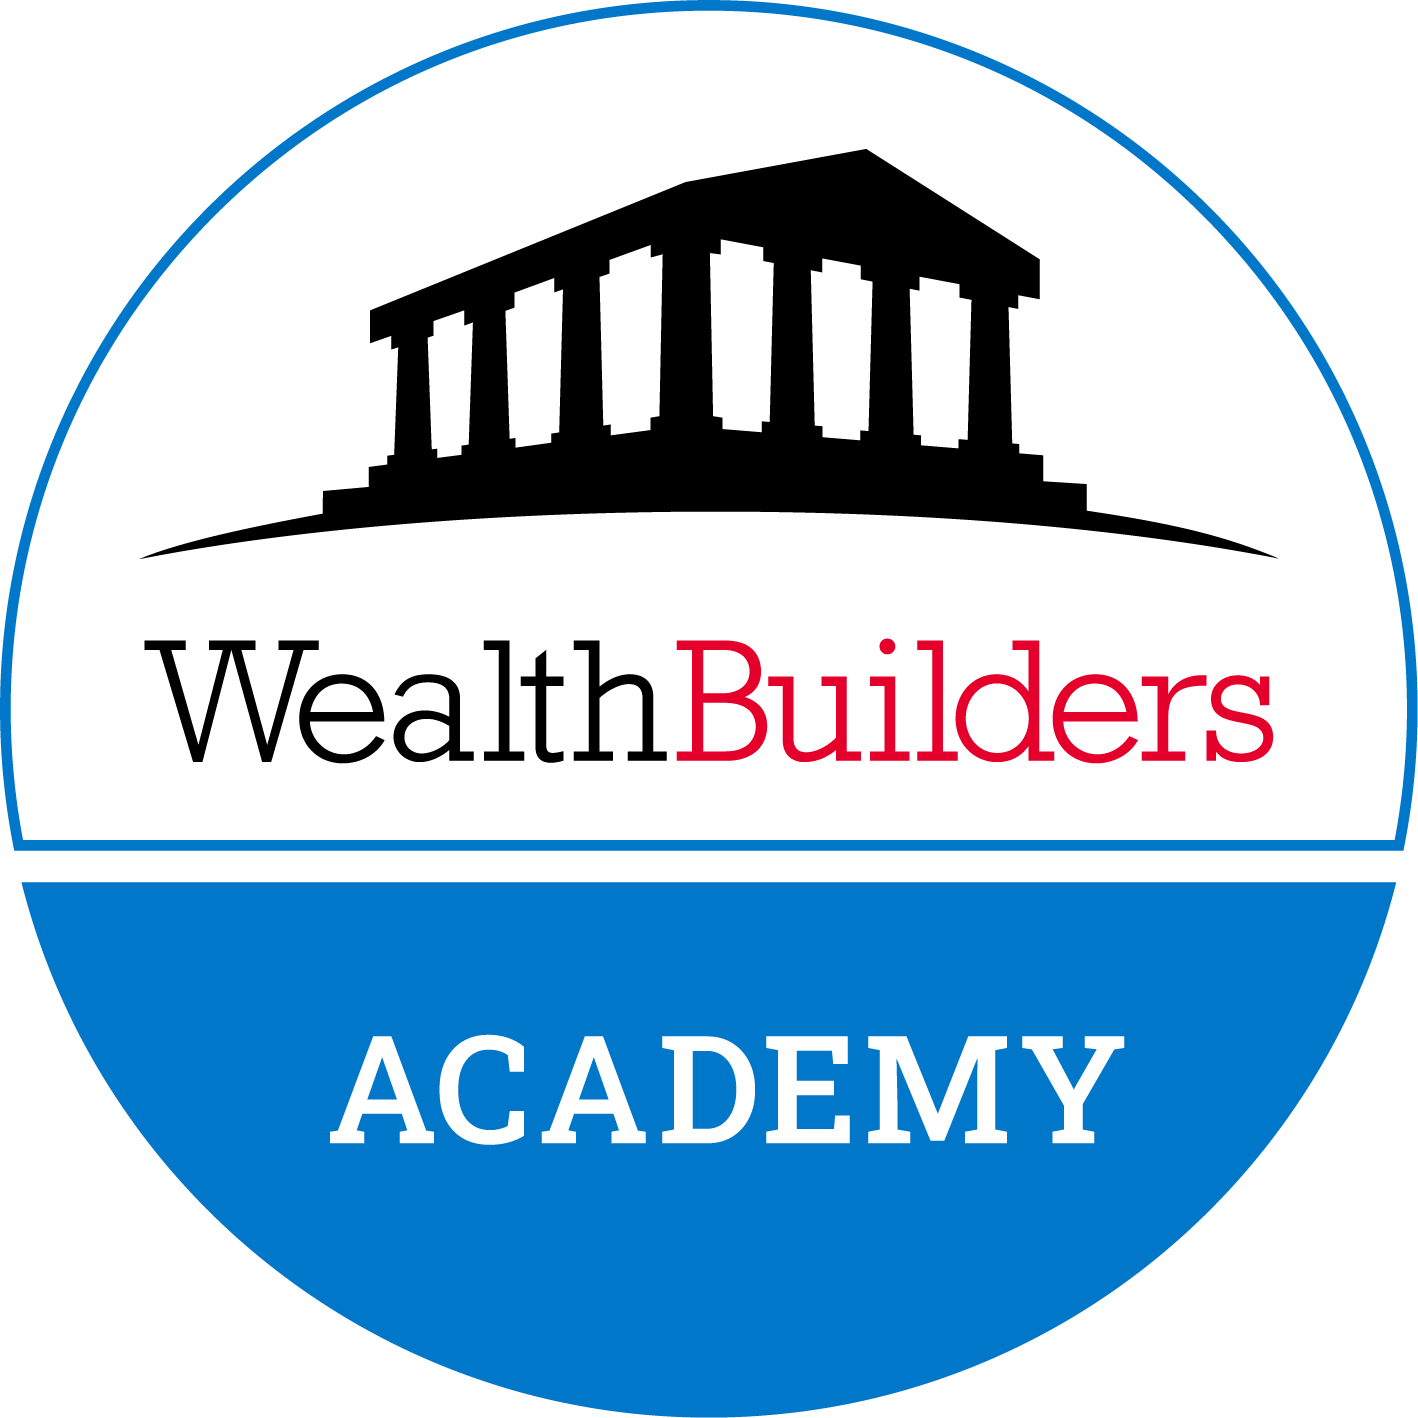 Football stadium of Wealth Builders to be filled by new Academy.